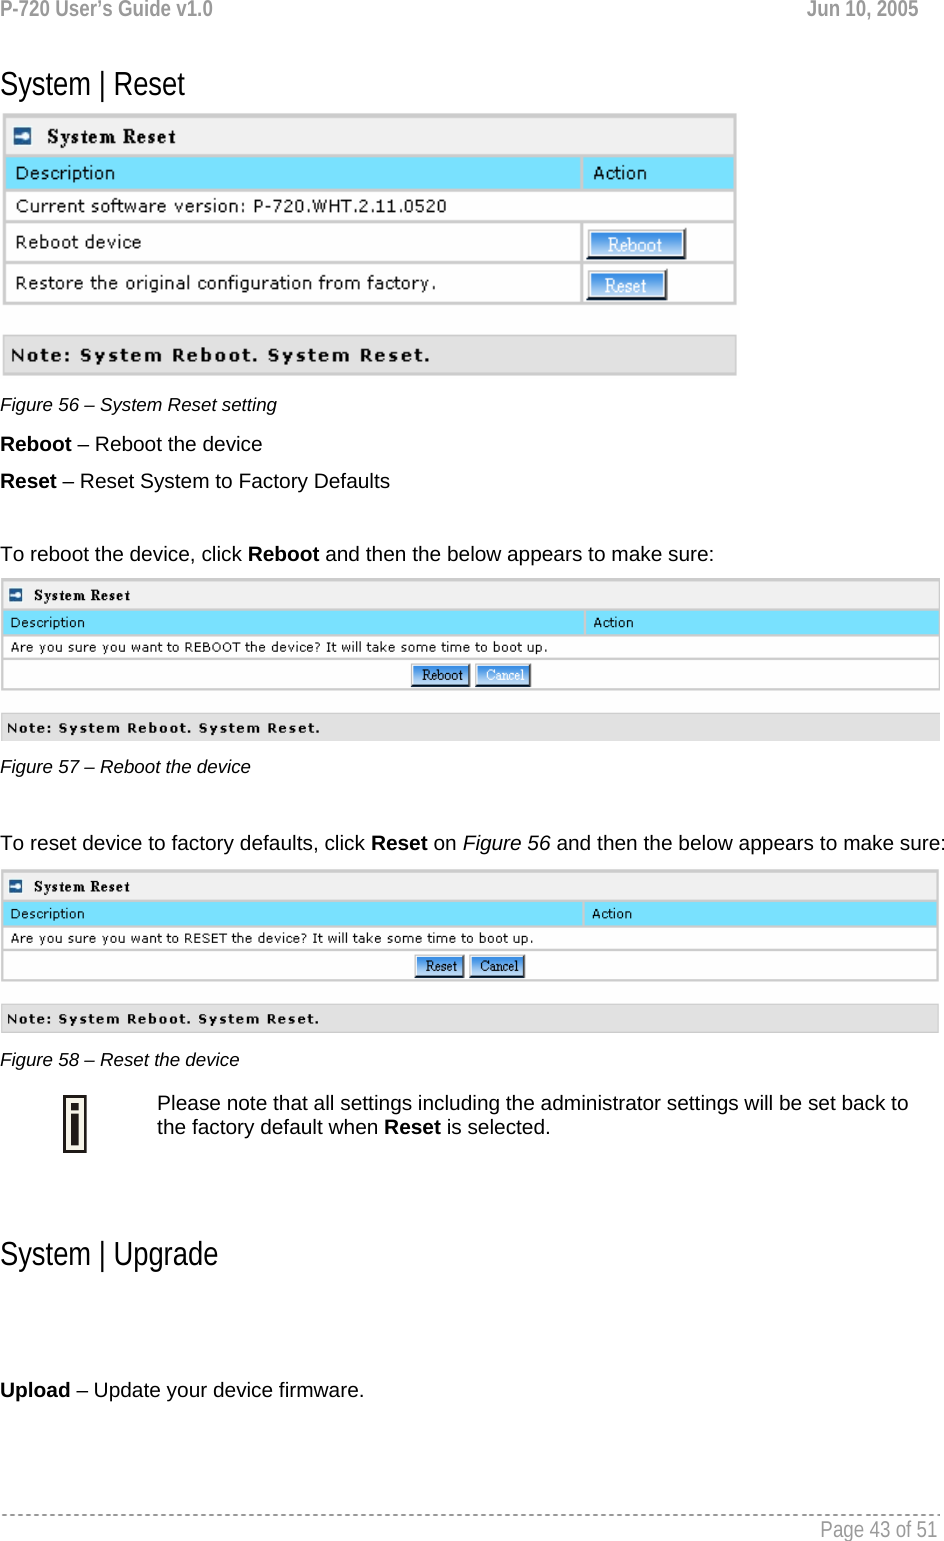 P-720 User’s Guide v1.0  Jun 10, 2005     Page 43 of 51   System | Reset  Figure 56 – System Reset setting Reboot – Reboot the device Reset – Reset System to Factory Defaults  To reboot the device, click Reboot and then the below appears to make sure:  Figure 57 – Reboot the device  To reset device to factory defaults, click Reset on Figure 56 and then the below appears to make sure:  Figure 58 – Reset the device  Please note that all settings including the administrator settings will be set back to the factory default when Reset is selected.  System | Upgrade   Upload – Update your device firmware. 